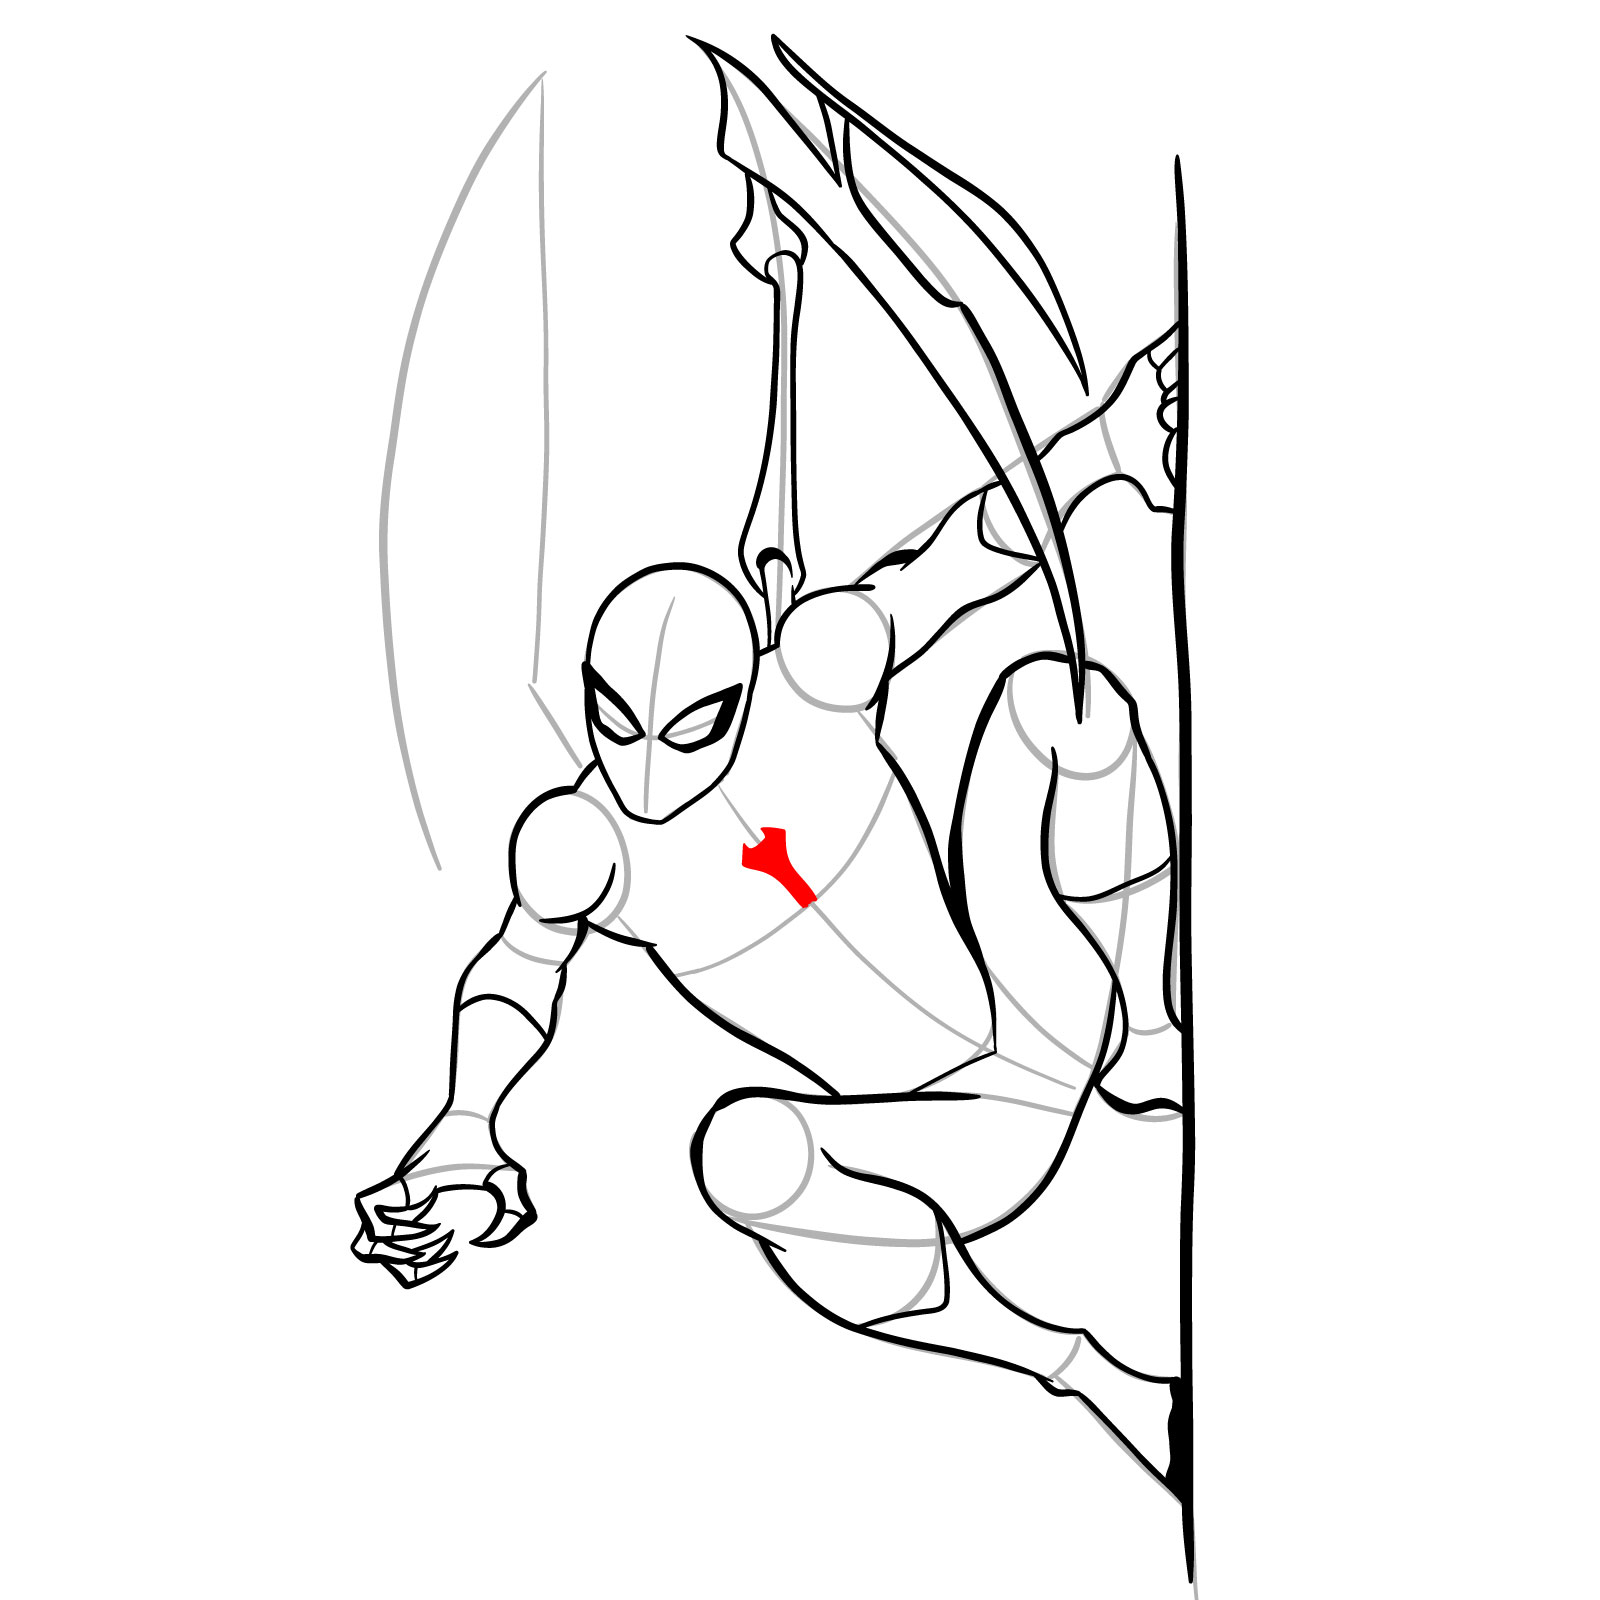 How to draw The Superior Spider-Man - step 28